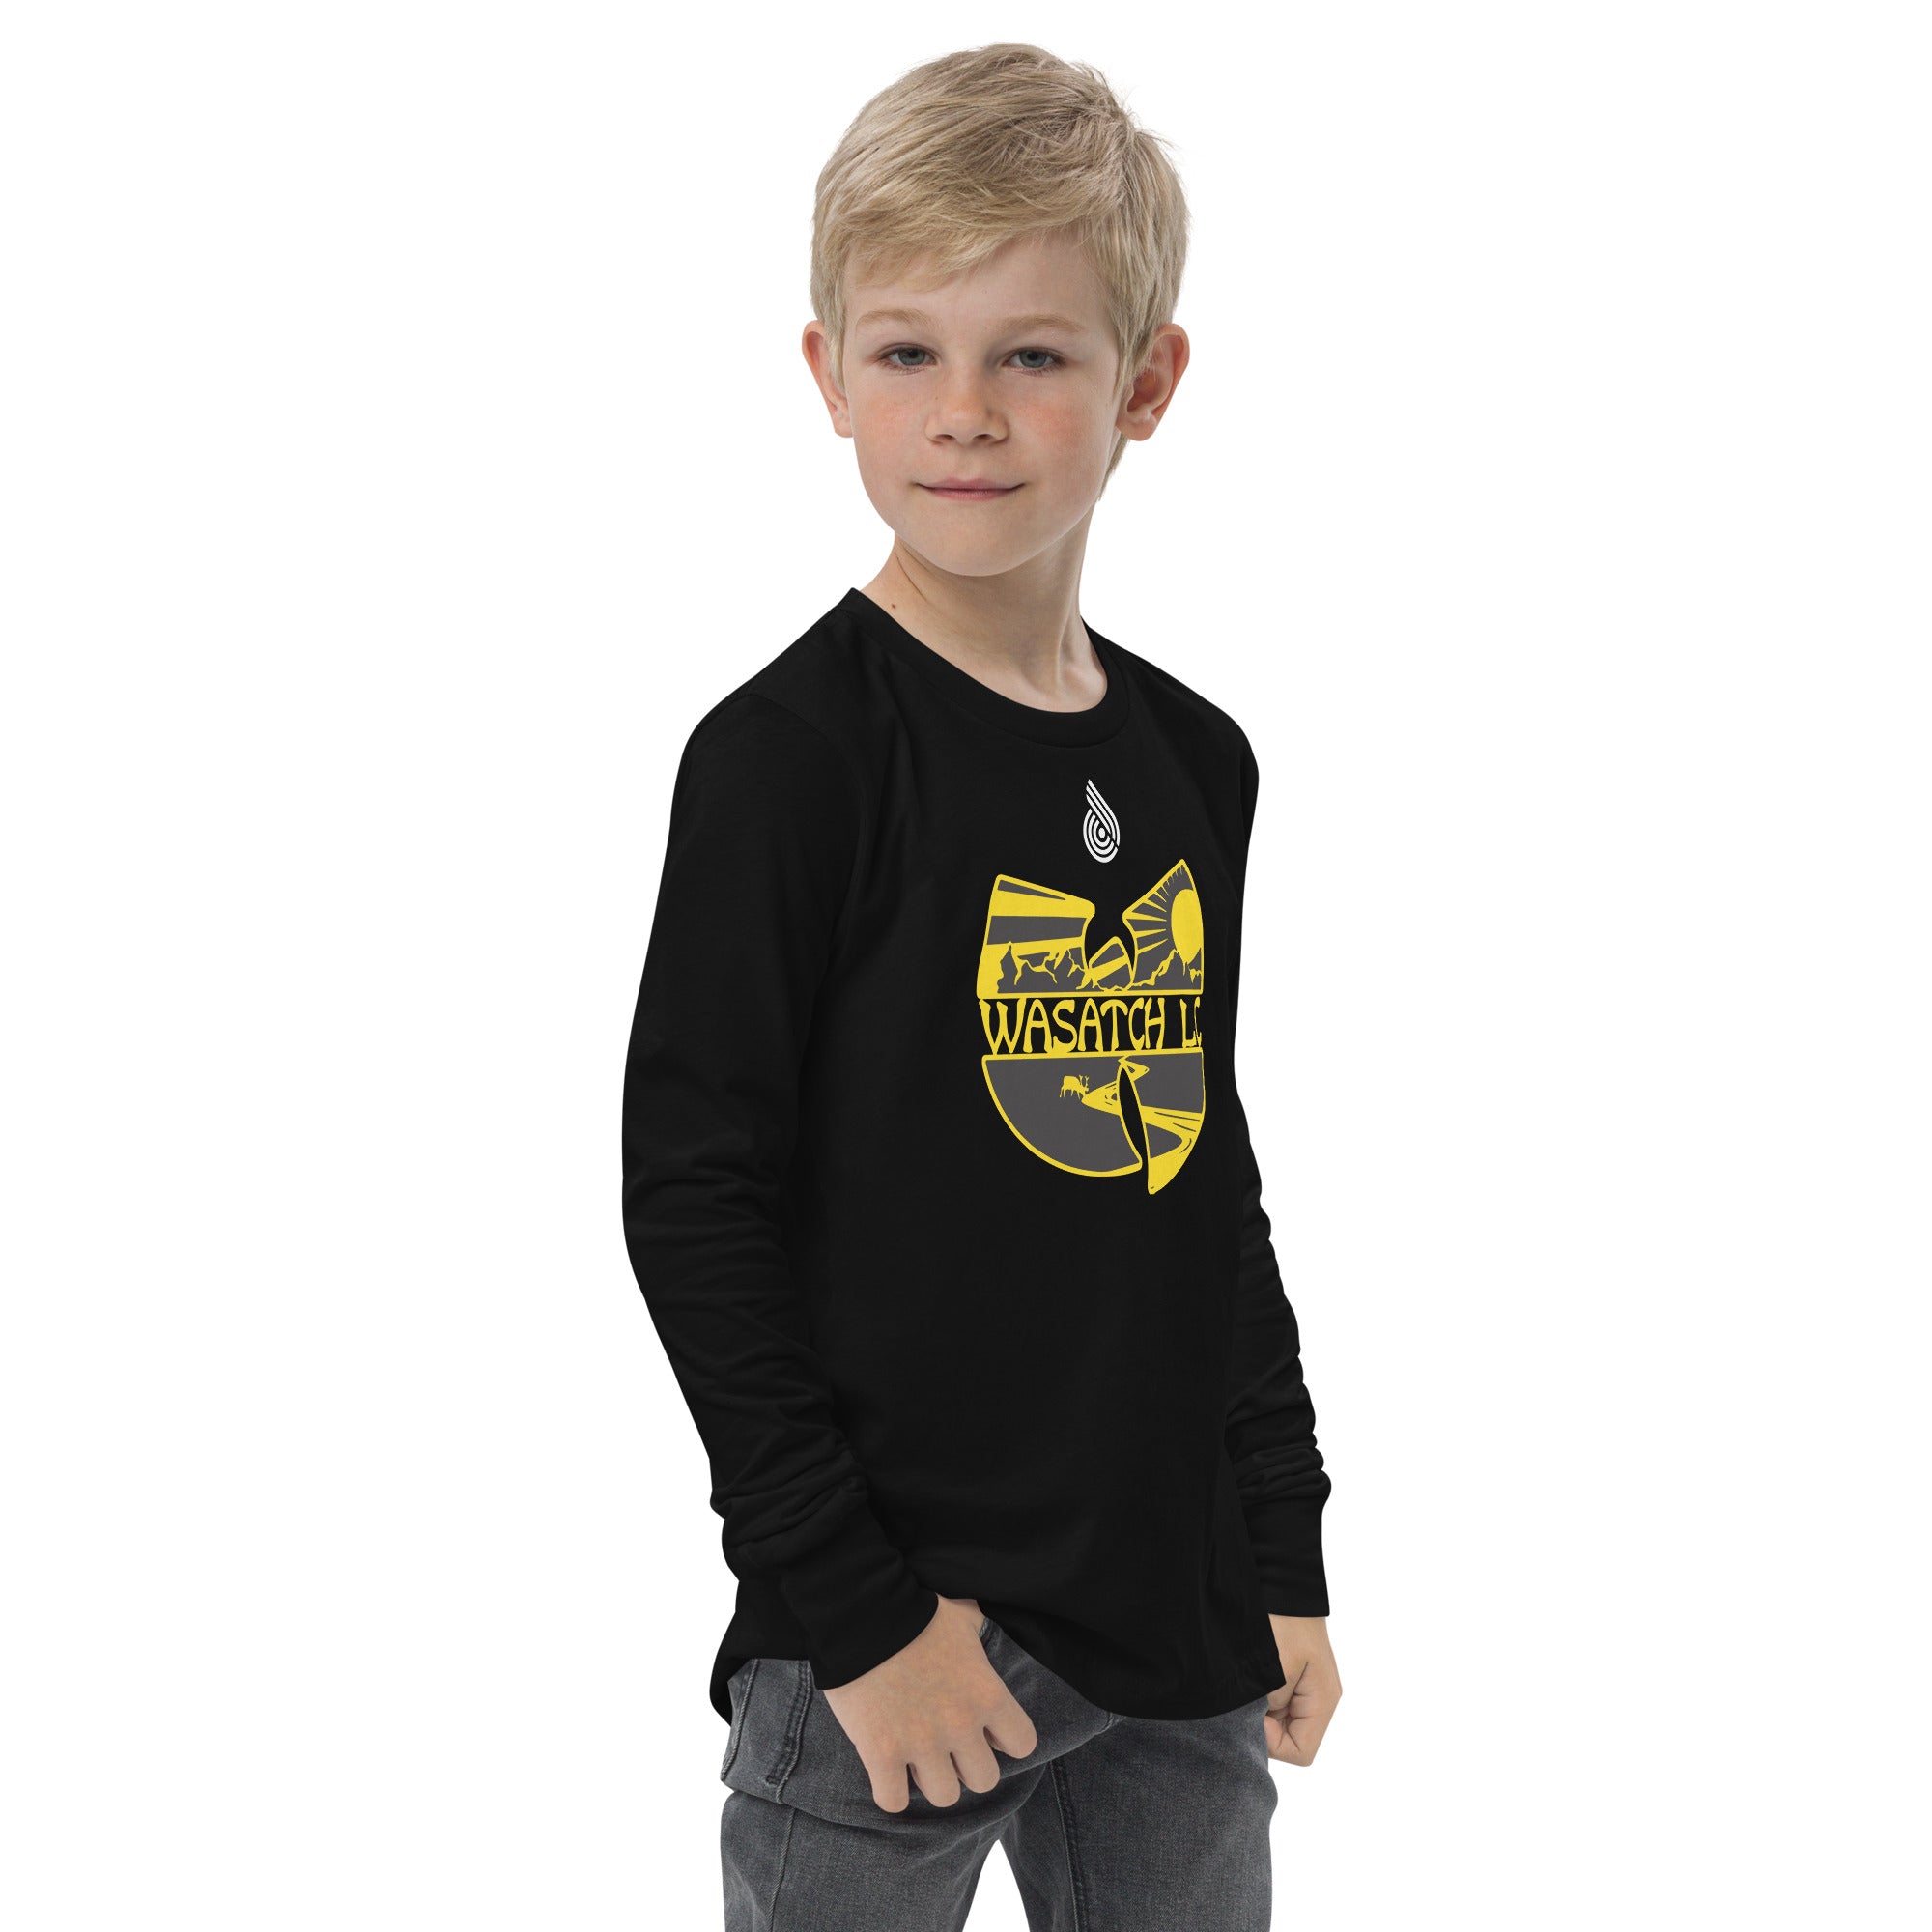 Wasatch LC Youth long sleeve tee